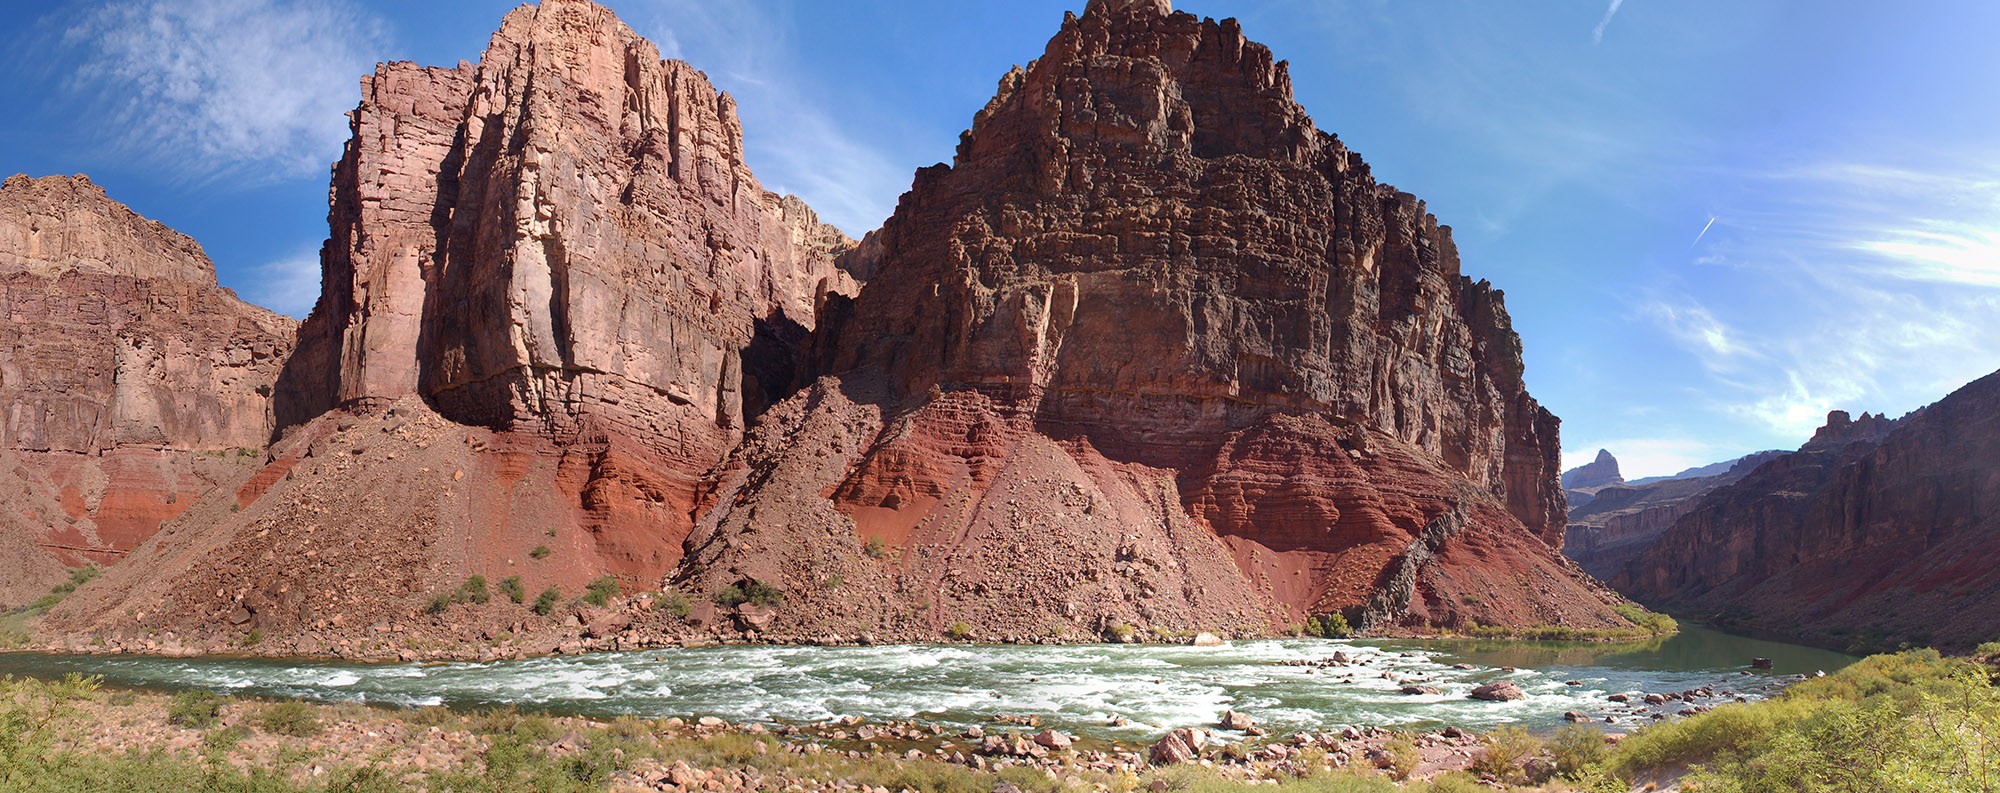 Hance Rapid with tall canyons above